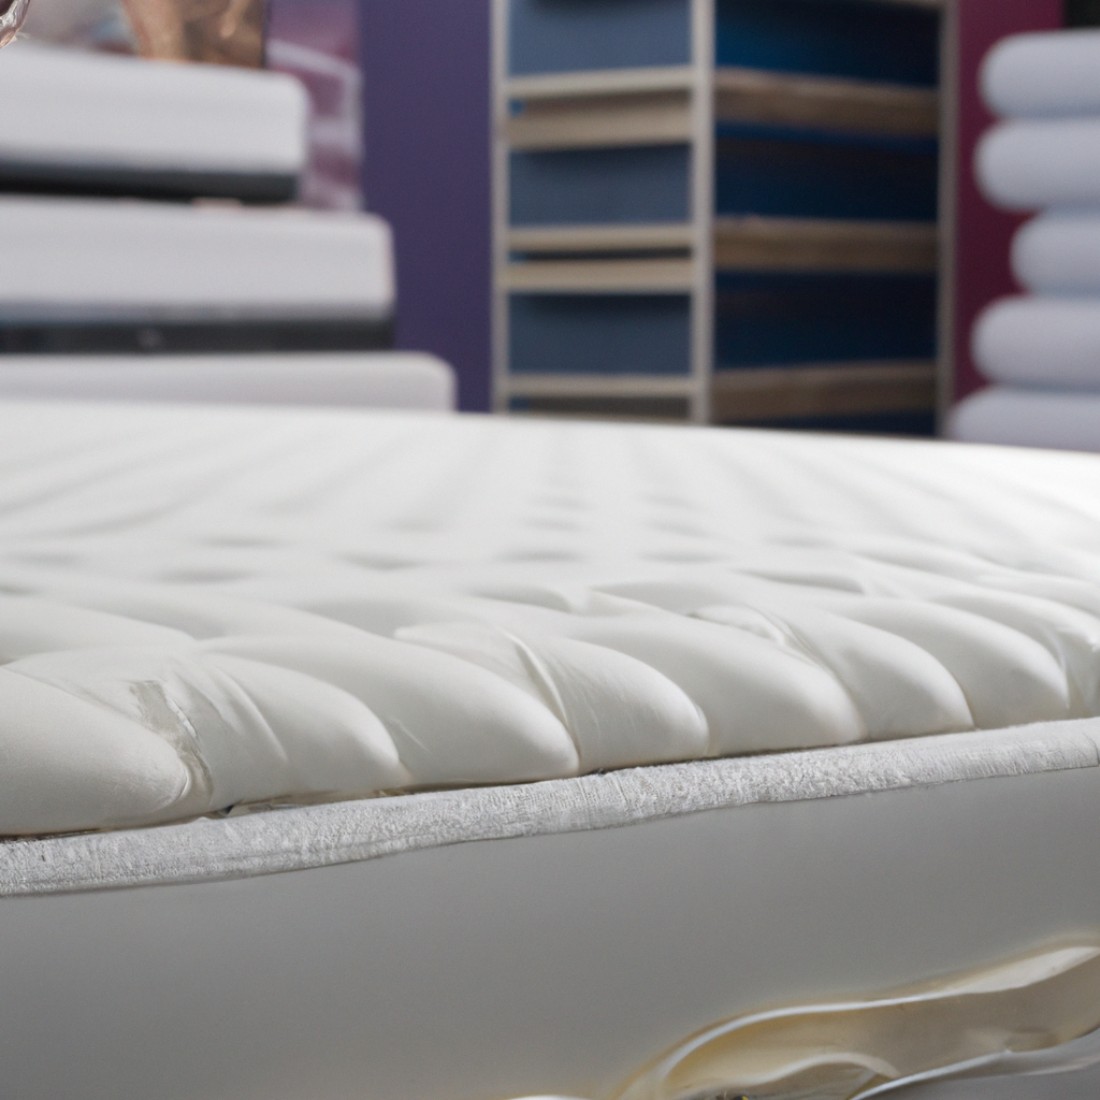 Upgrade your sleep game with Colchones para Dormilones! 😴💤 Experience the comfort and support of our premium mattresses. Say goodbye to restless nights. Visit us today! #MattressStore #DreamySleep